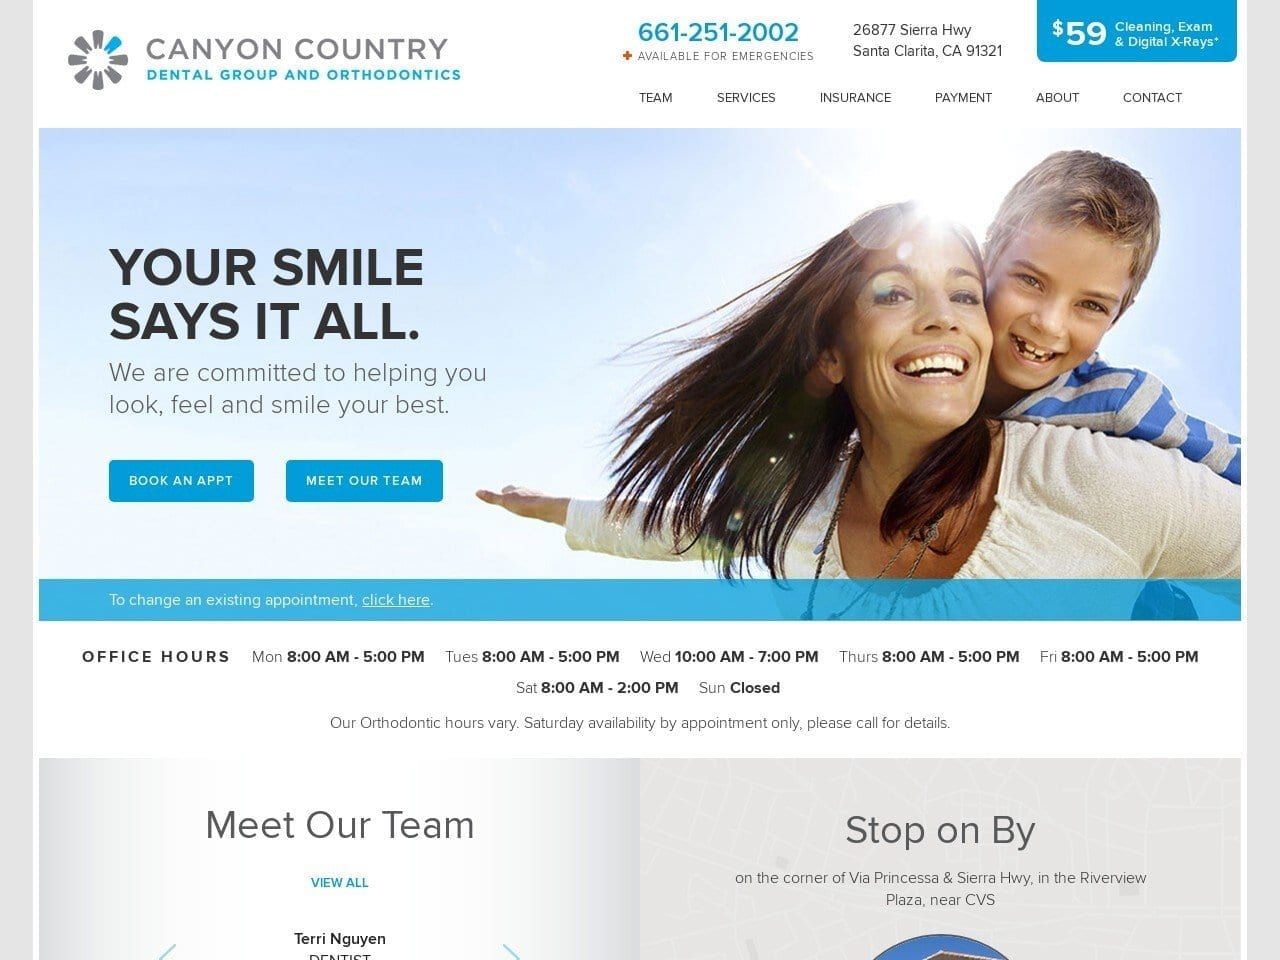 Canyon Country Dental Group Nguyen Terri DDS Website Screenshot from canyoncountrydentalgroup.com